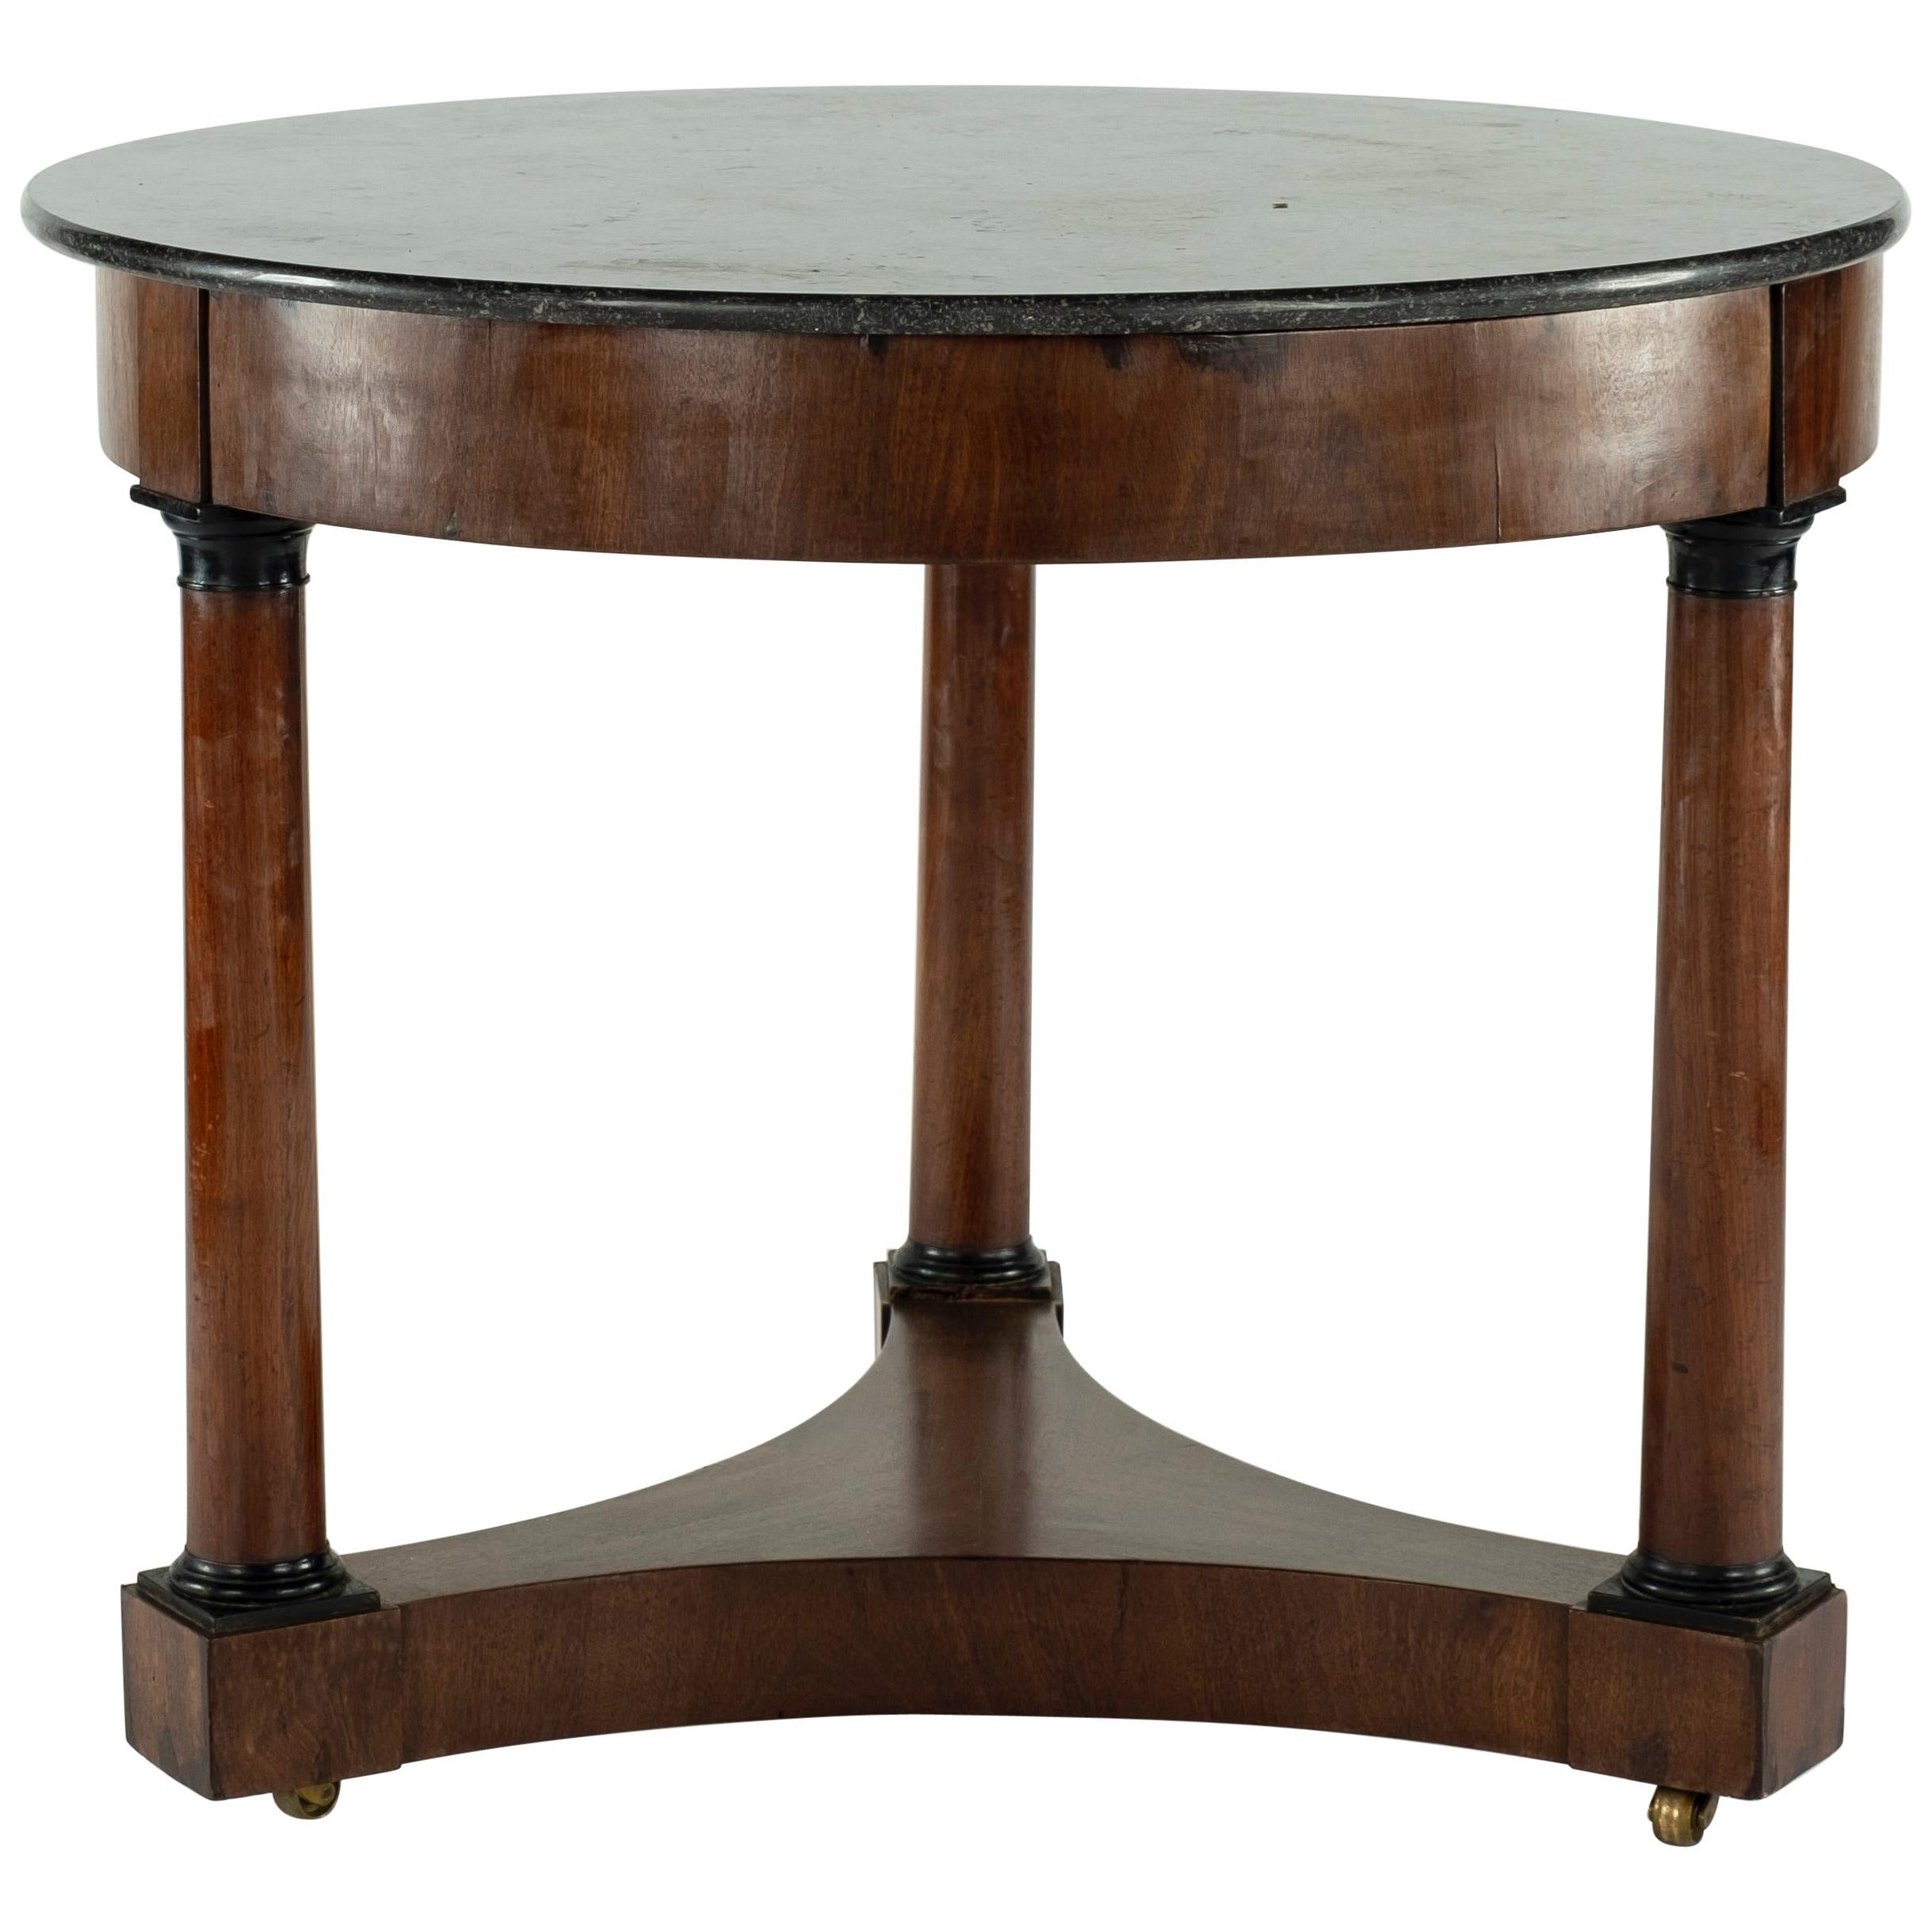 19th Century Gueridon with Marble Top